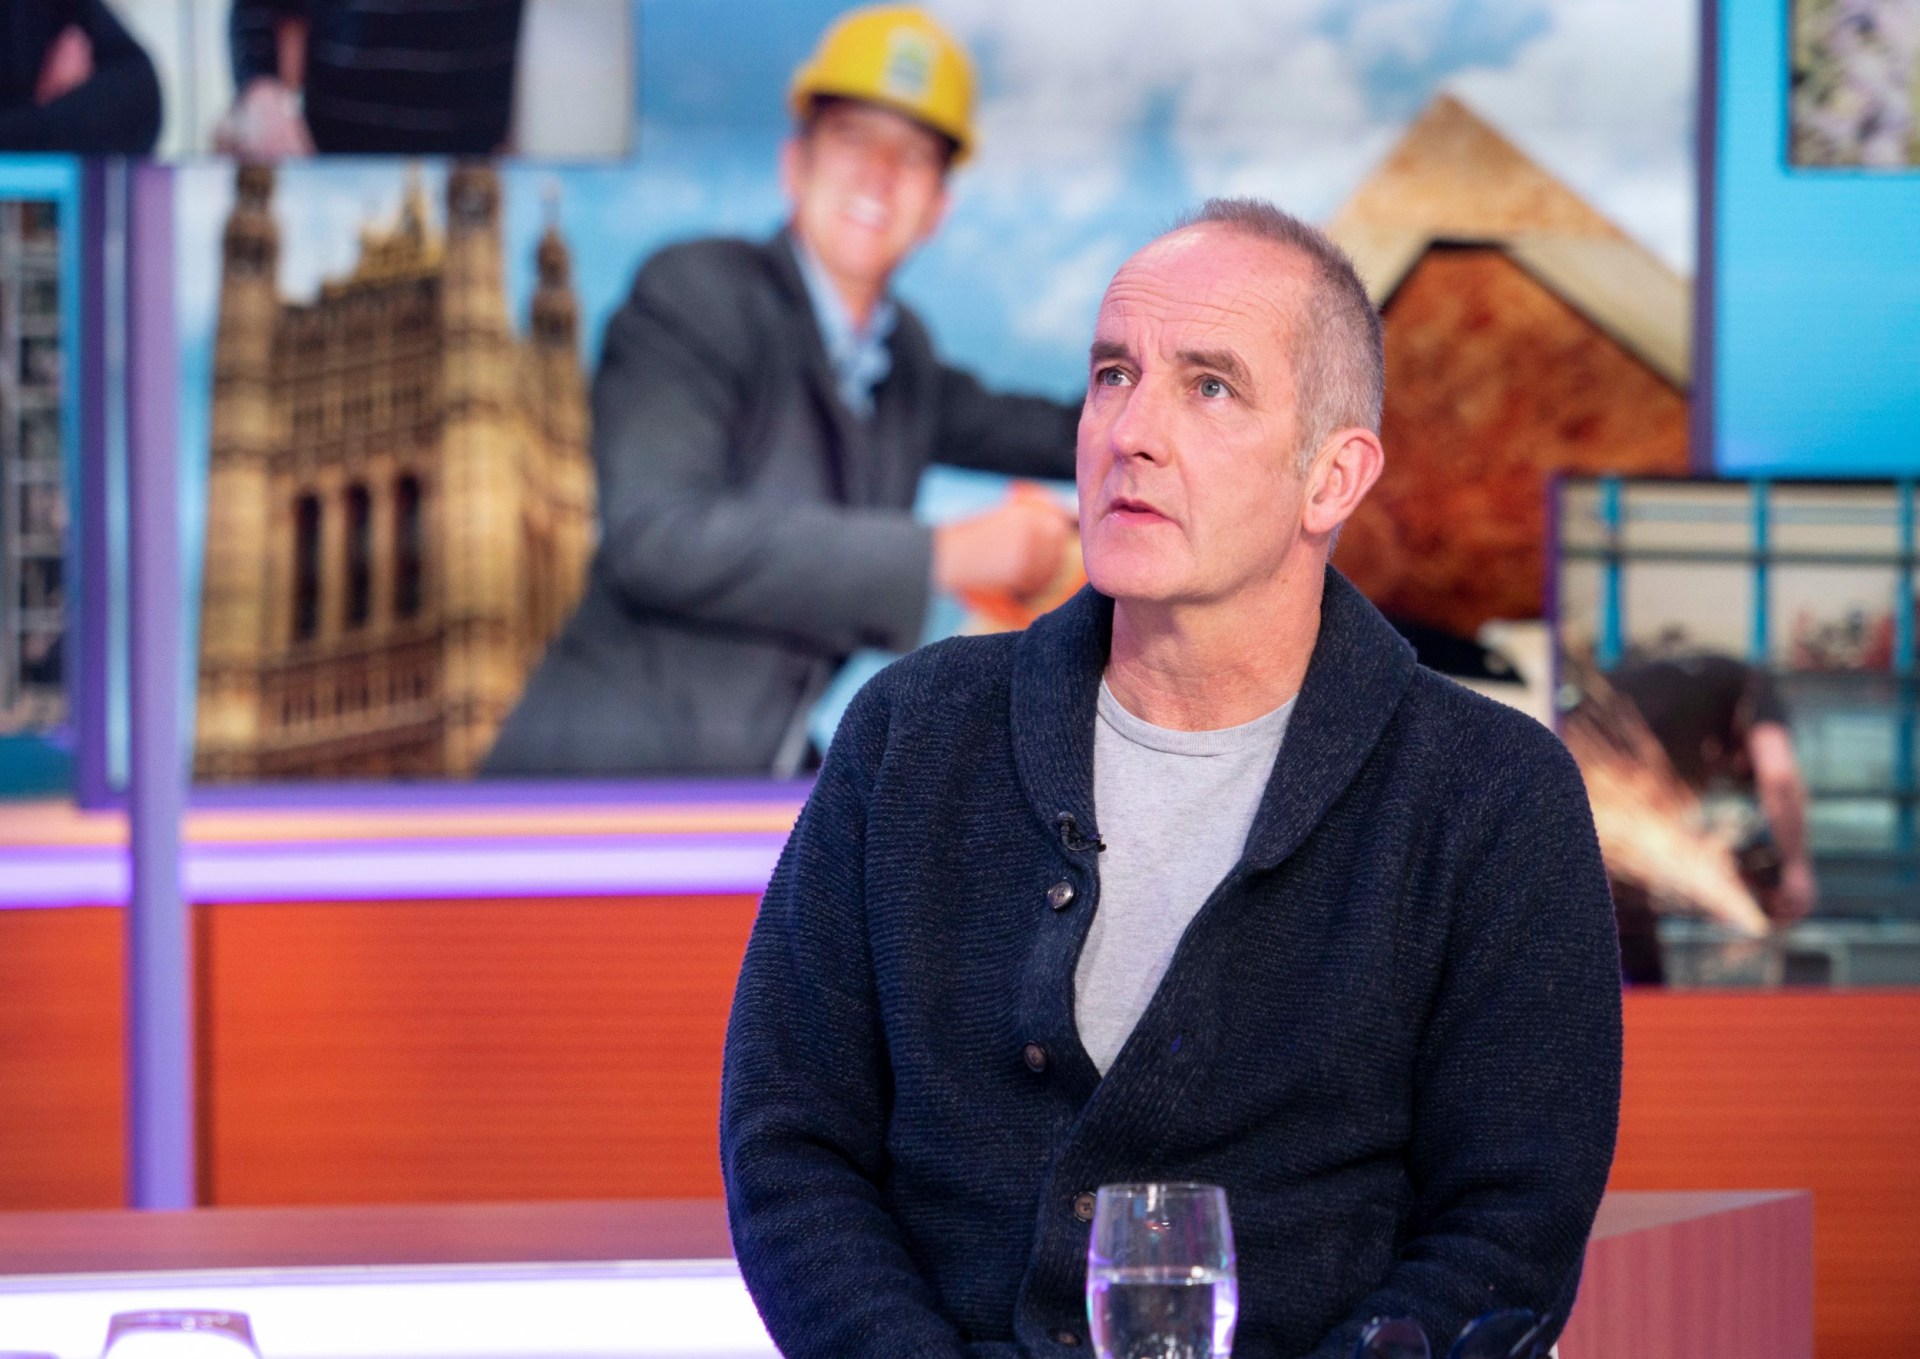 grand designs’ kevin mccloud warns uk property market is ‘broken and dysfunctional’